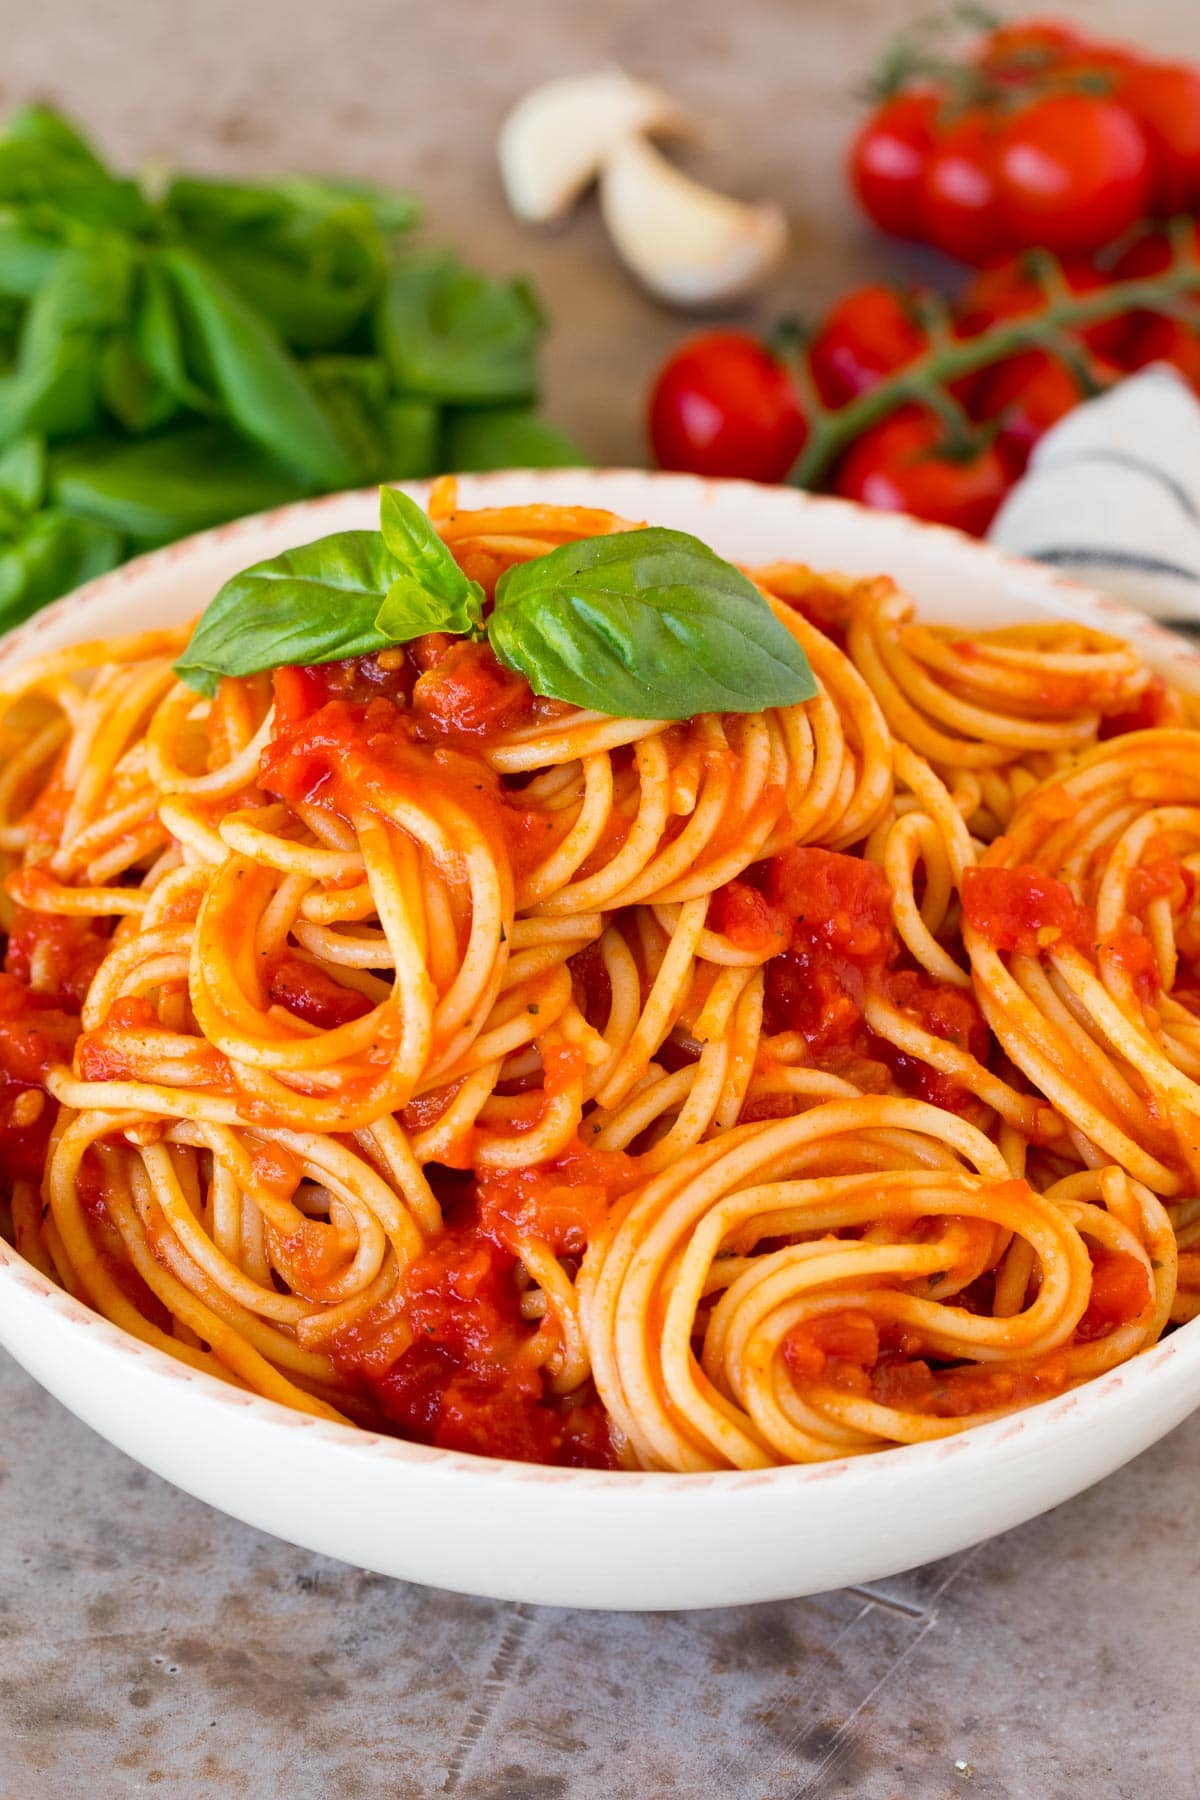 Spaghetti tossed with marinara sauce in a bowl.